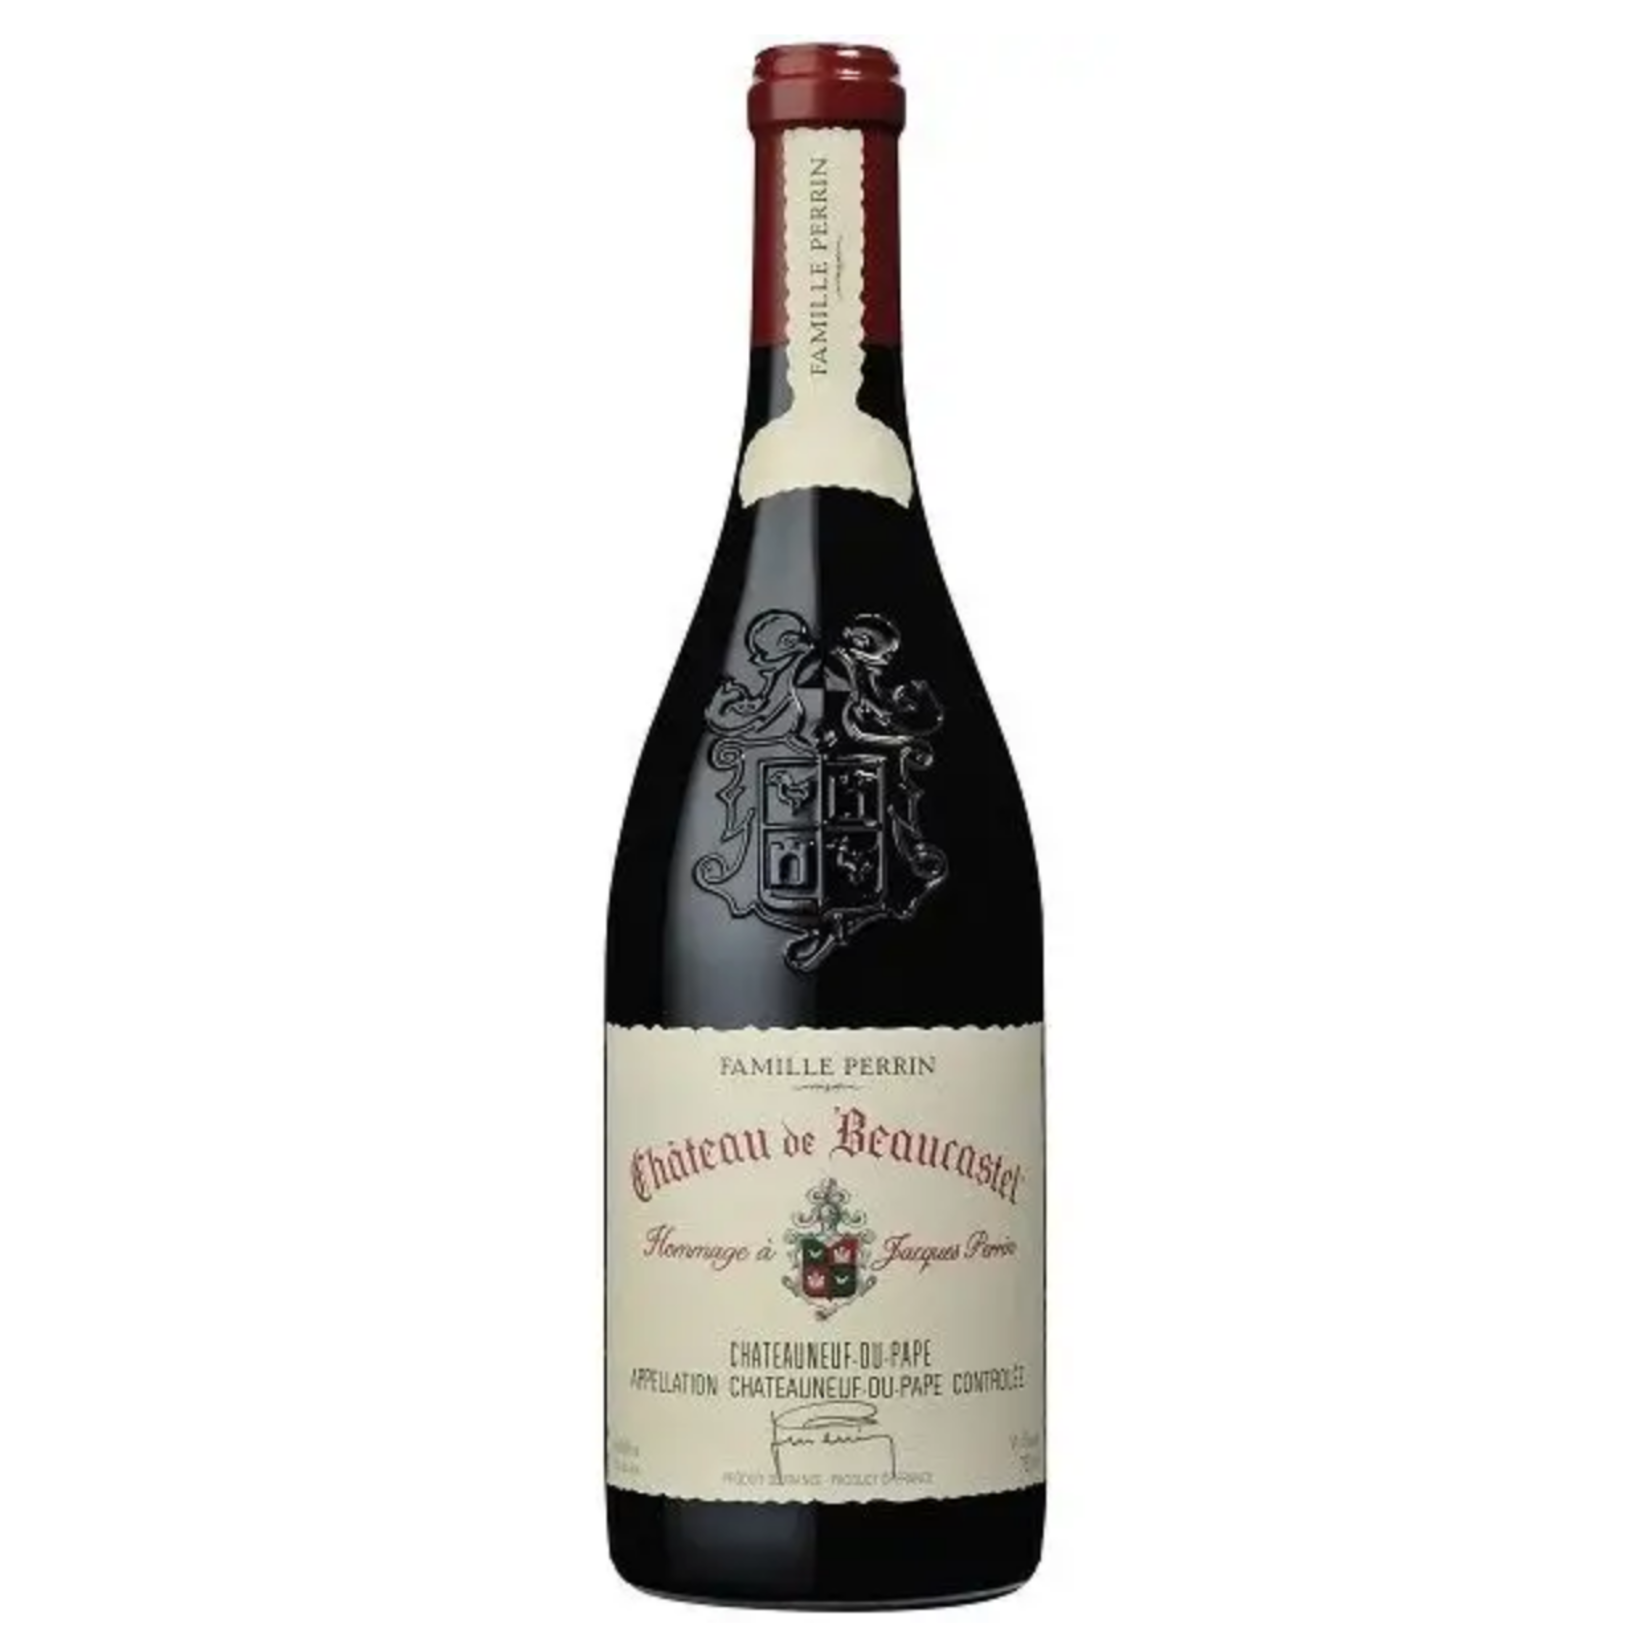 2020, Chateau Beaucastel Chateauneuf-du-Pape, Red Rhone Blend, Chateauneuf-du-Pape, Southern Rhone, France, 14% Alc, CT